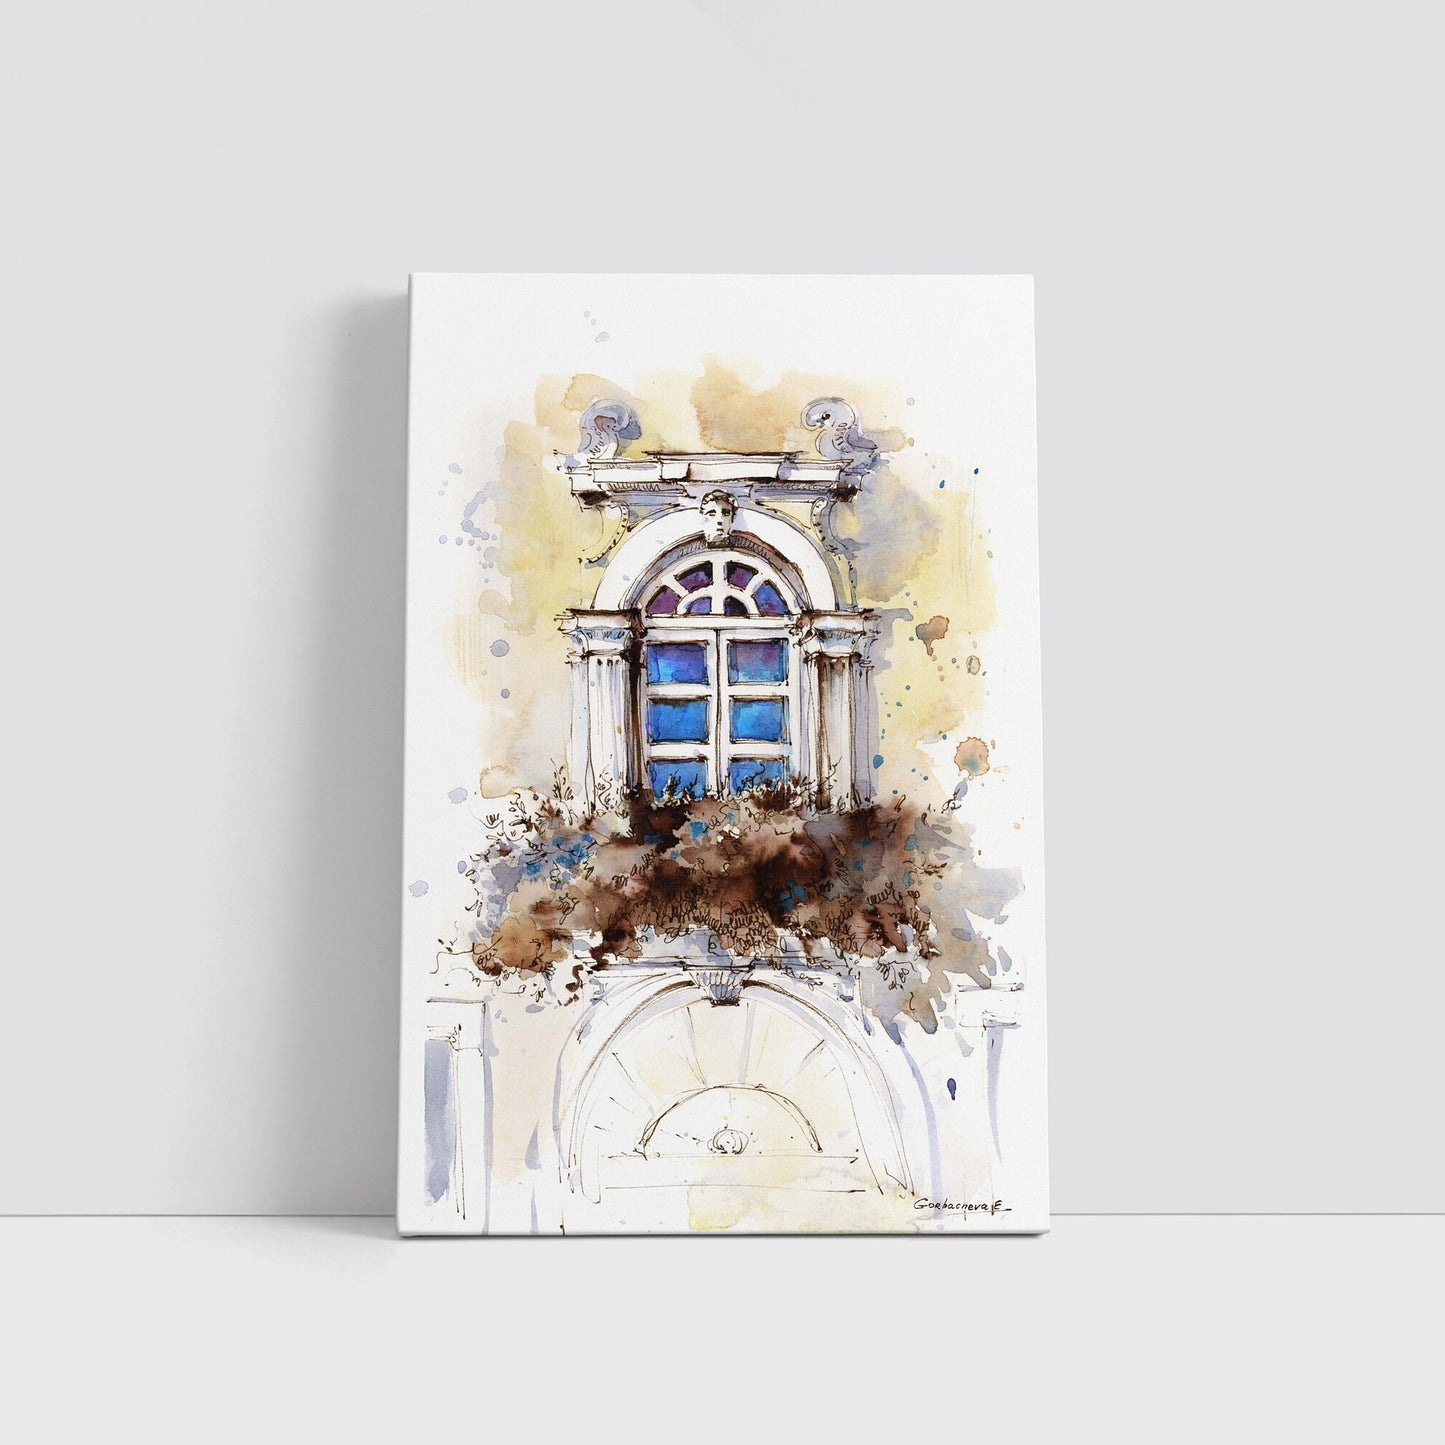 Travel Art Prints Set Of 2, City Scene with Door Window 2 Watercolor Artwork, Gallery Wall, Architecture Painting